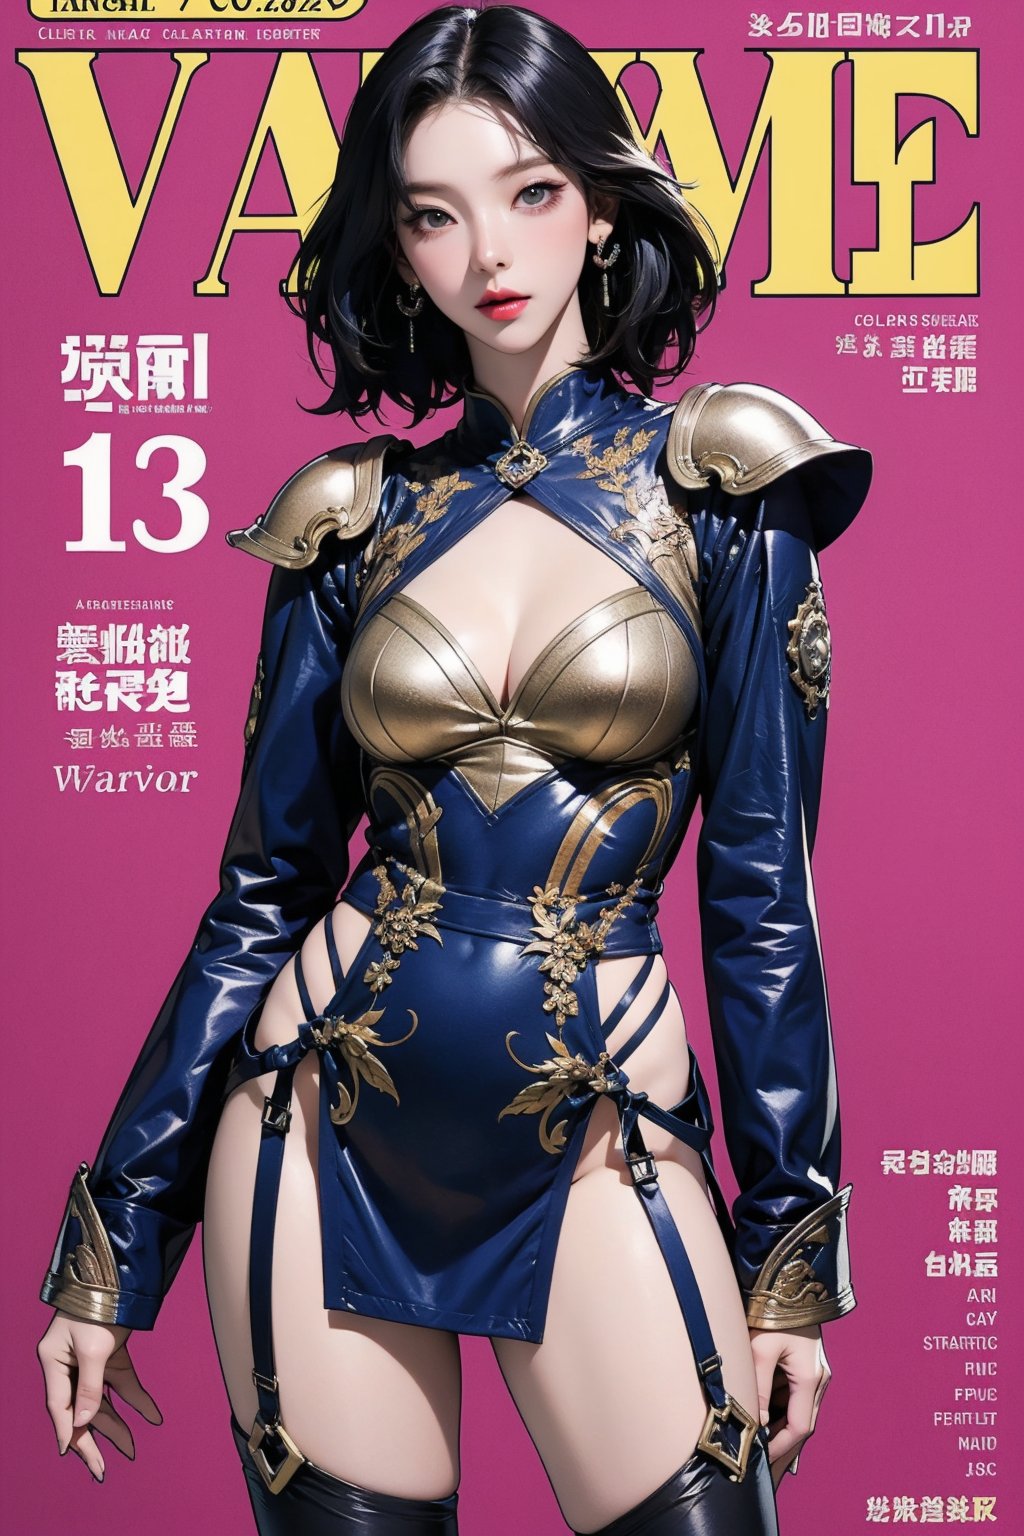 ((arc warior, )) thigh up body, standing, 1girl, looking at viewer, intricate clothes, professional lighting, different hairstyle, coloful outfit, colorful background, magazine cover, fantasy, ancient, armor, aespakarina, 